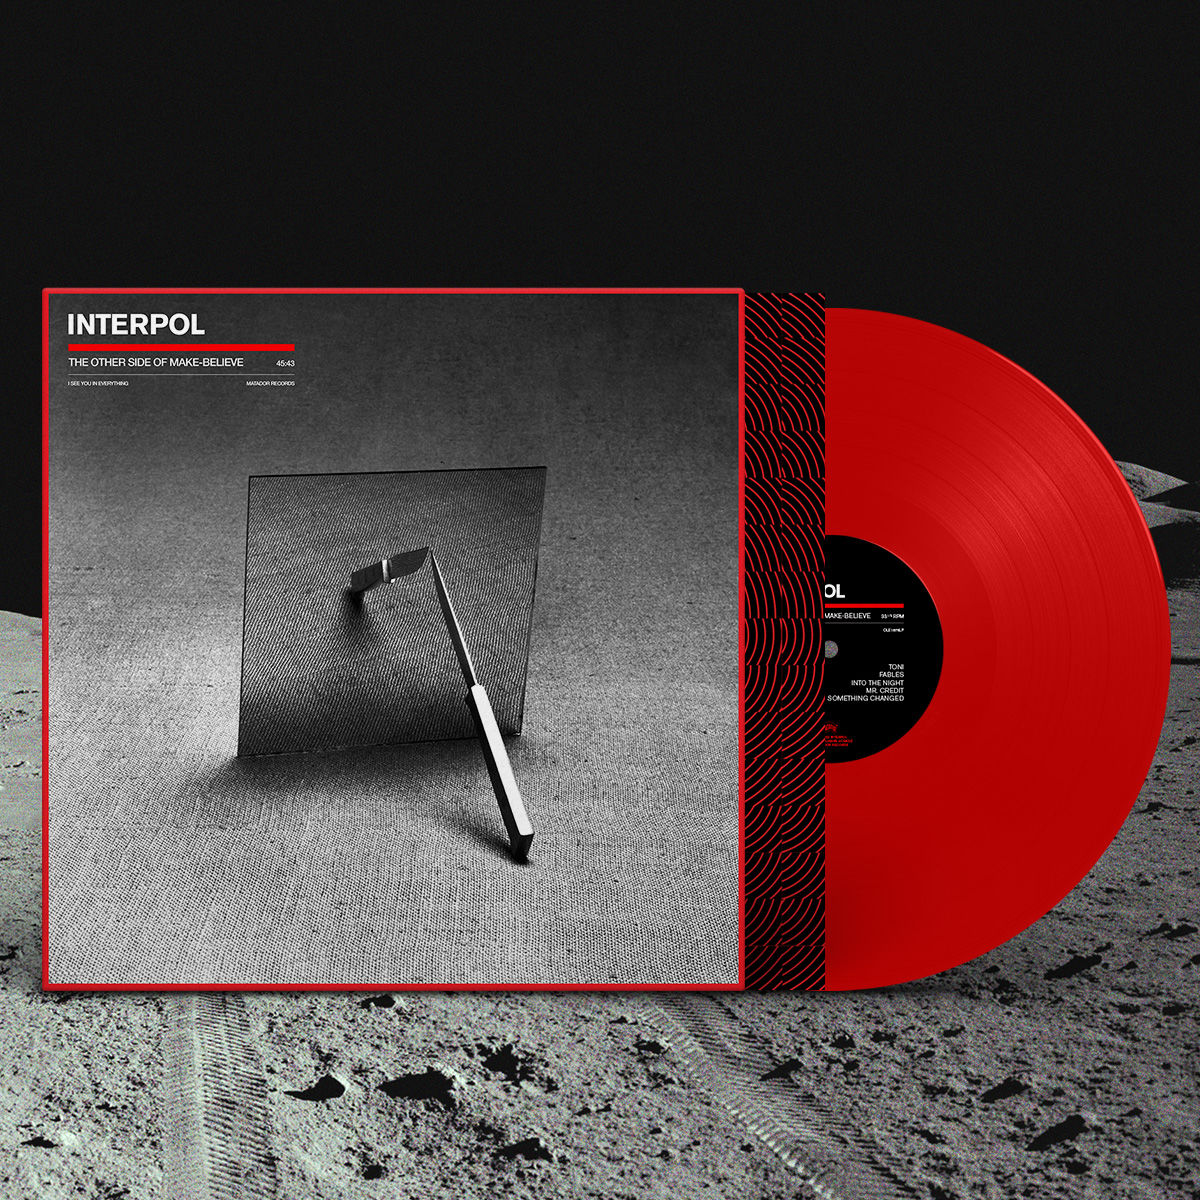 Interpol - The Other Side of Make-Believe: Limited Edition Red Vinyl LP